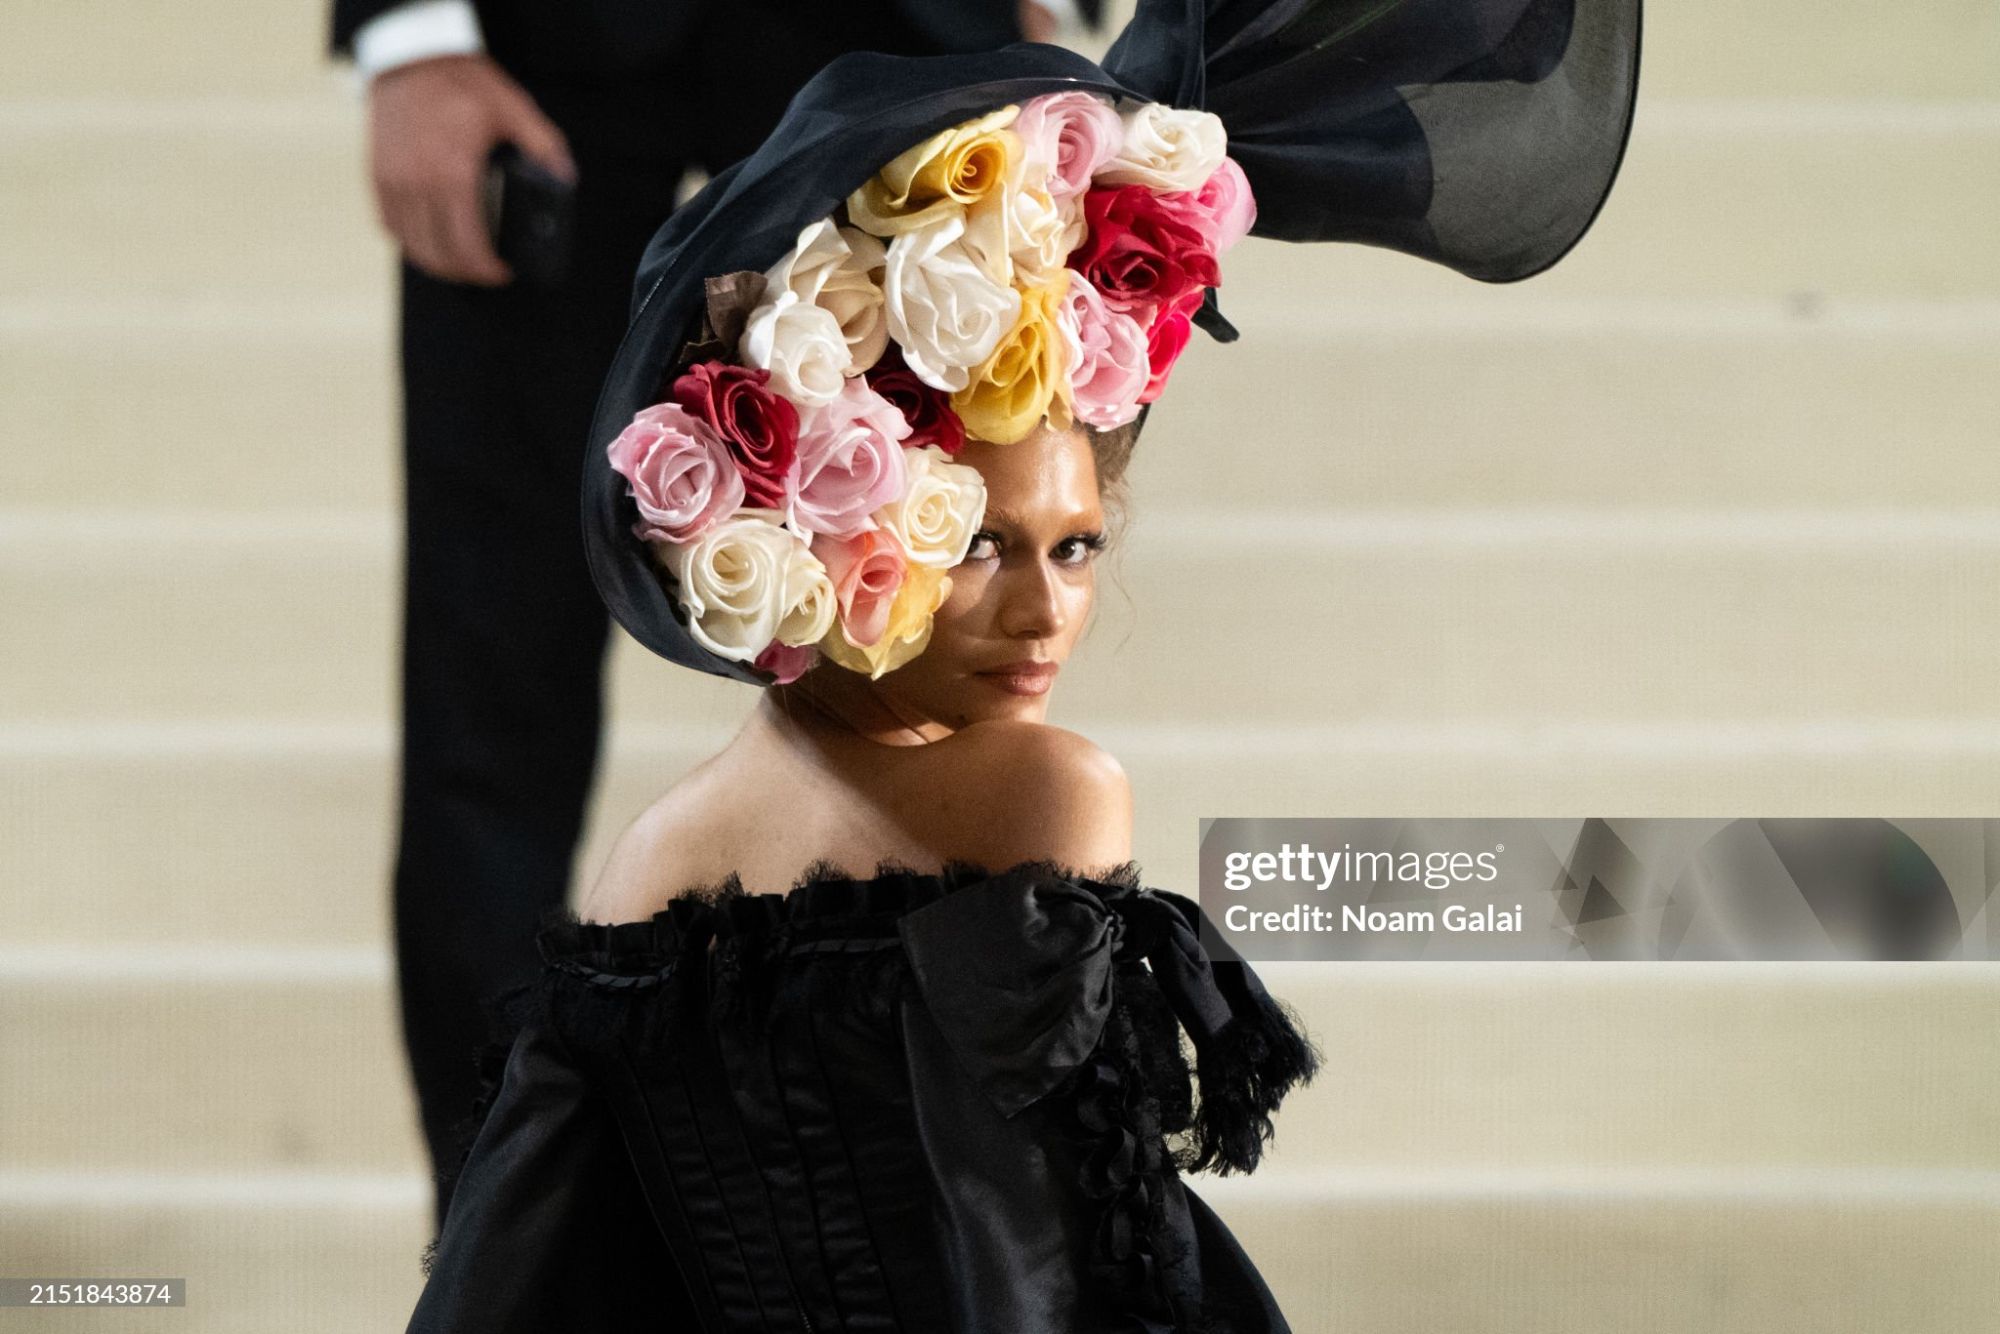 gettyimages-2151843874-2048x2048.jpg